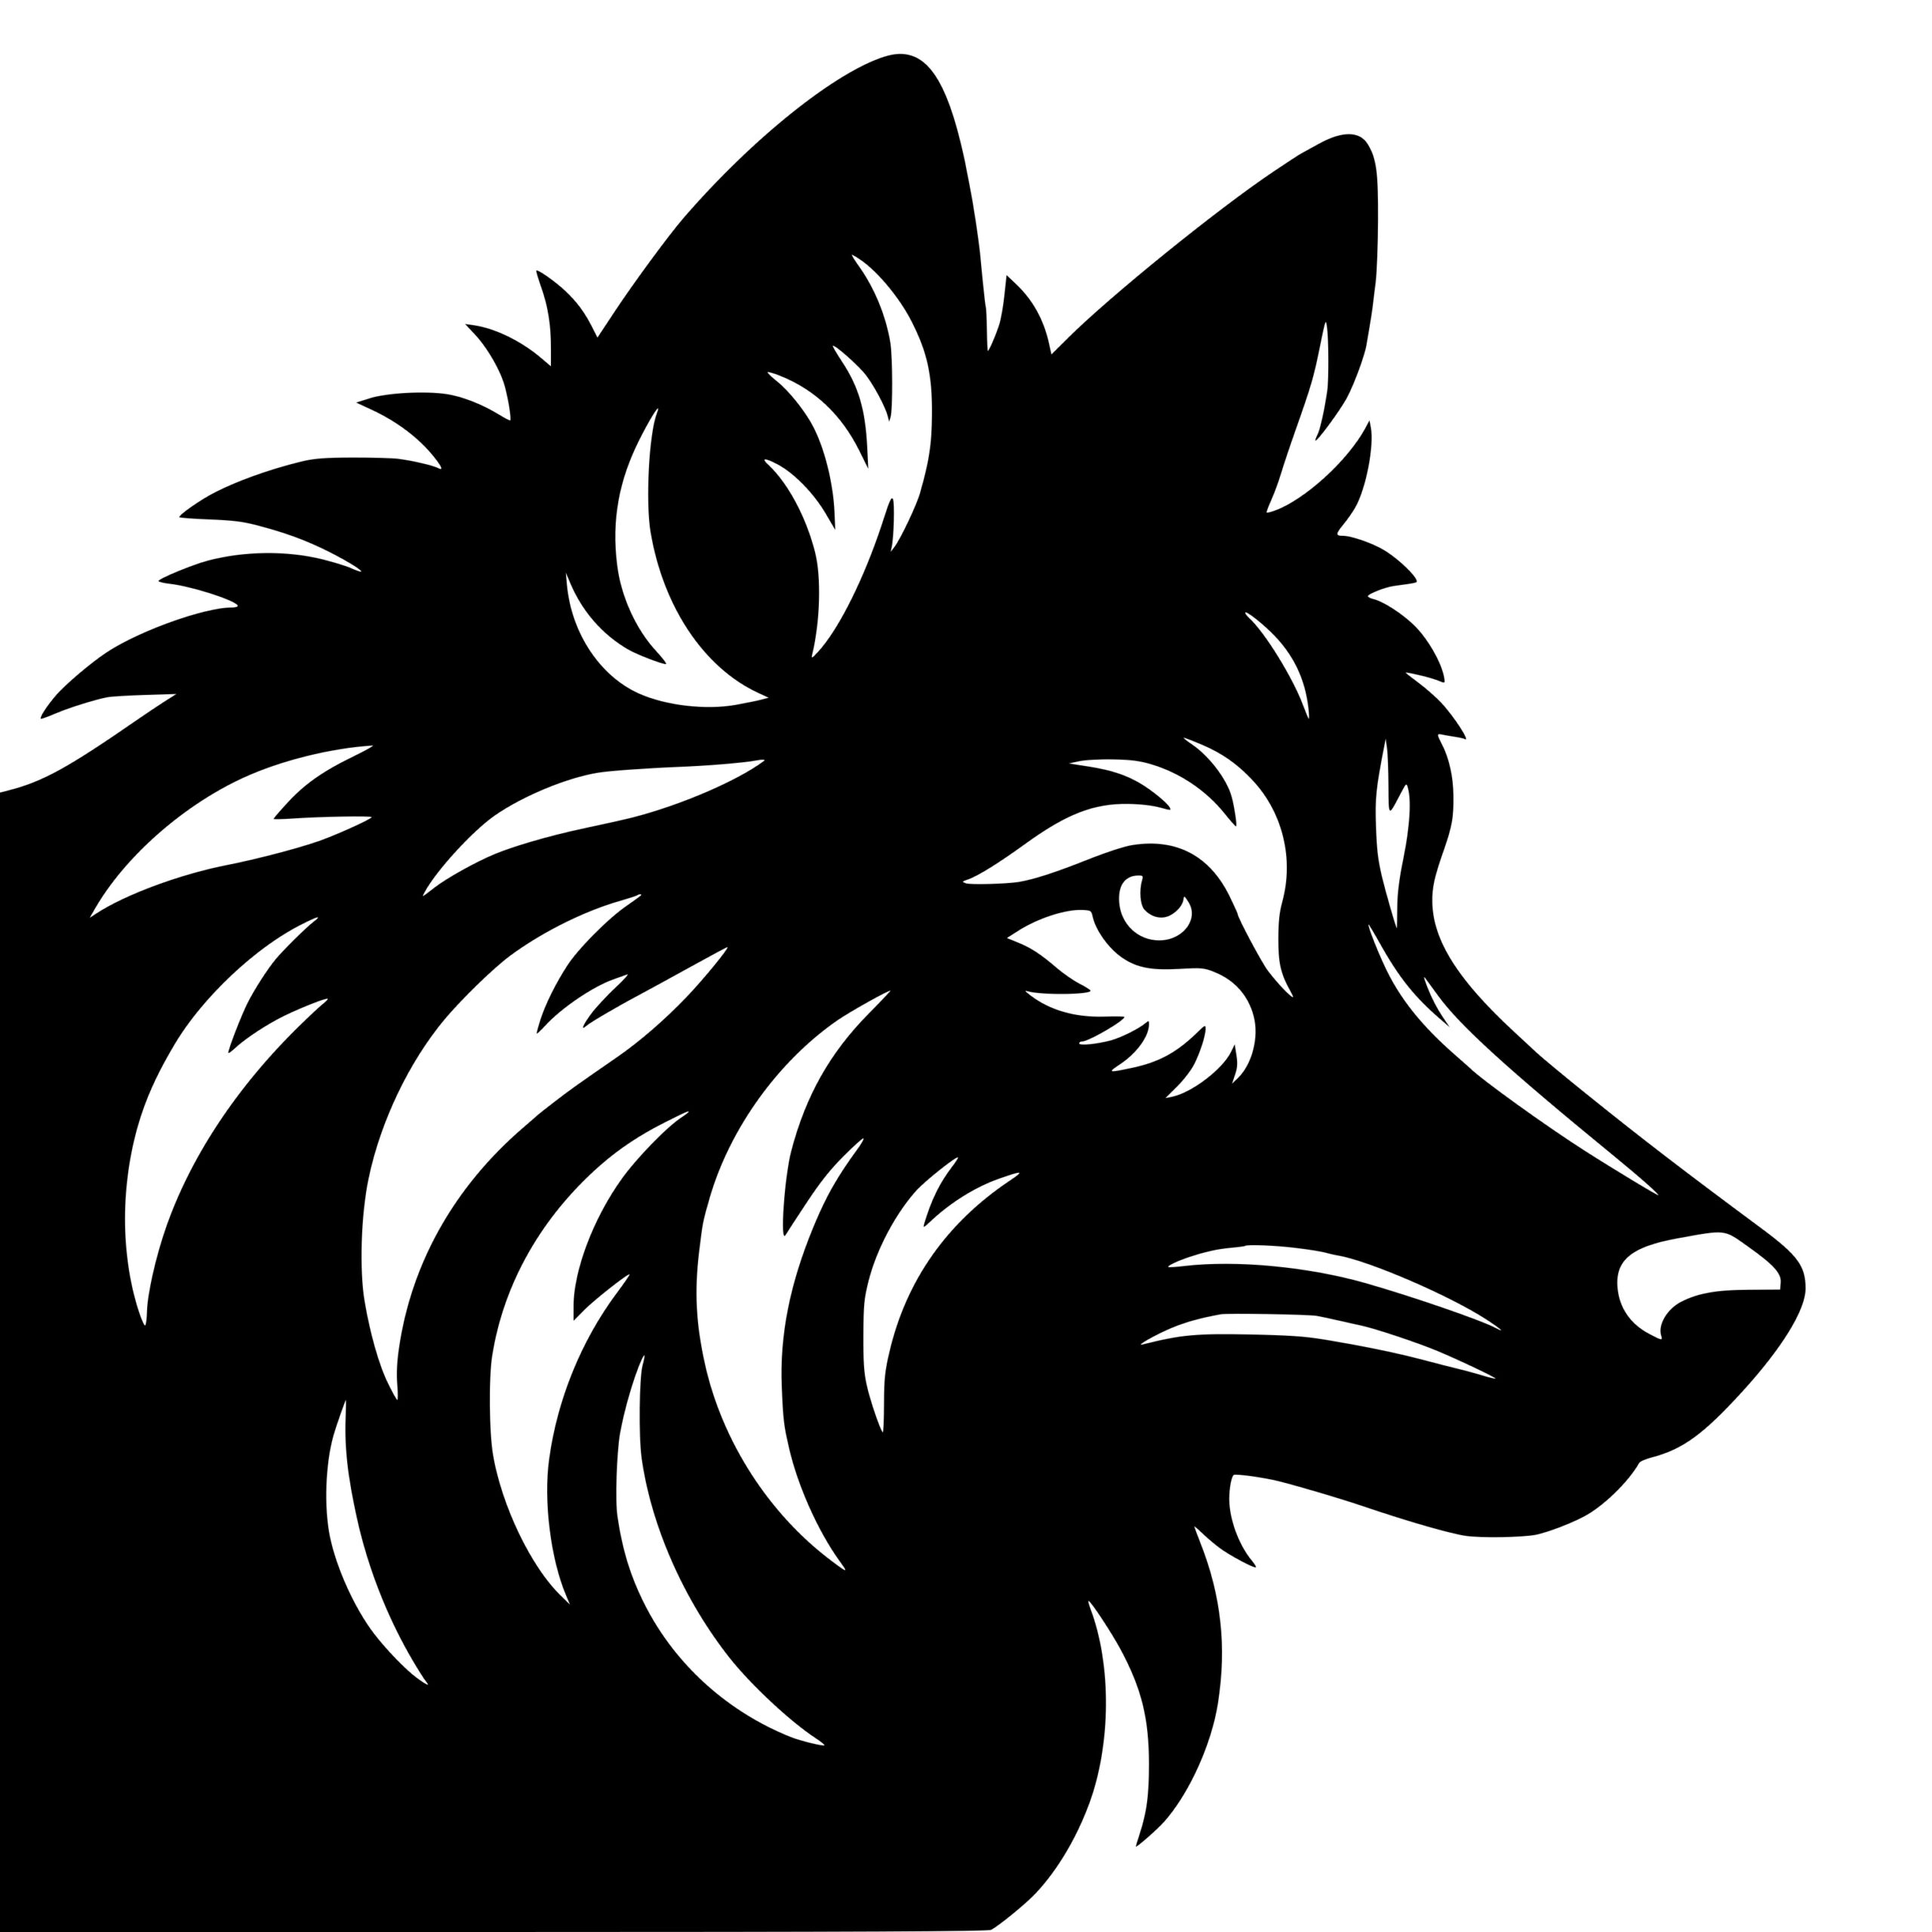 Intense Stare Wolf SVG, PNG, DXF Image for Cricut, Silhouette, Laser ...